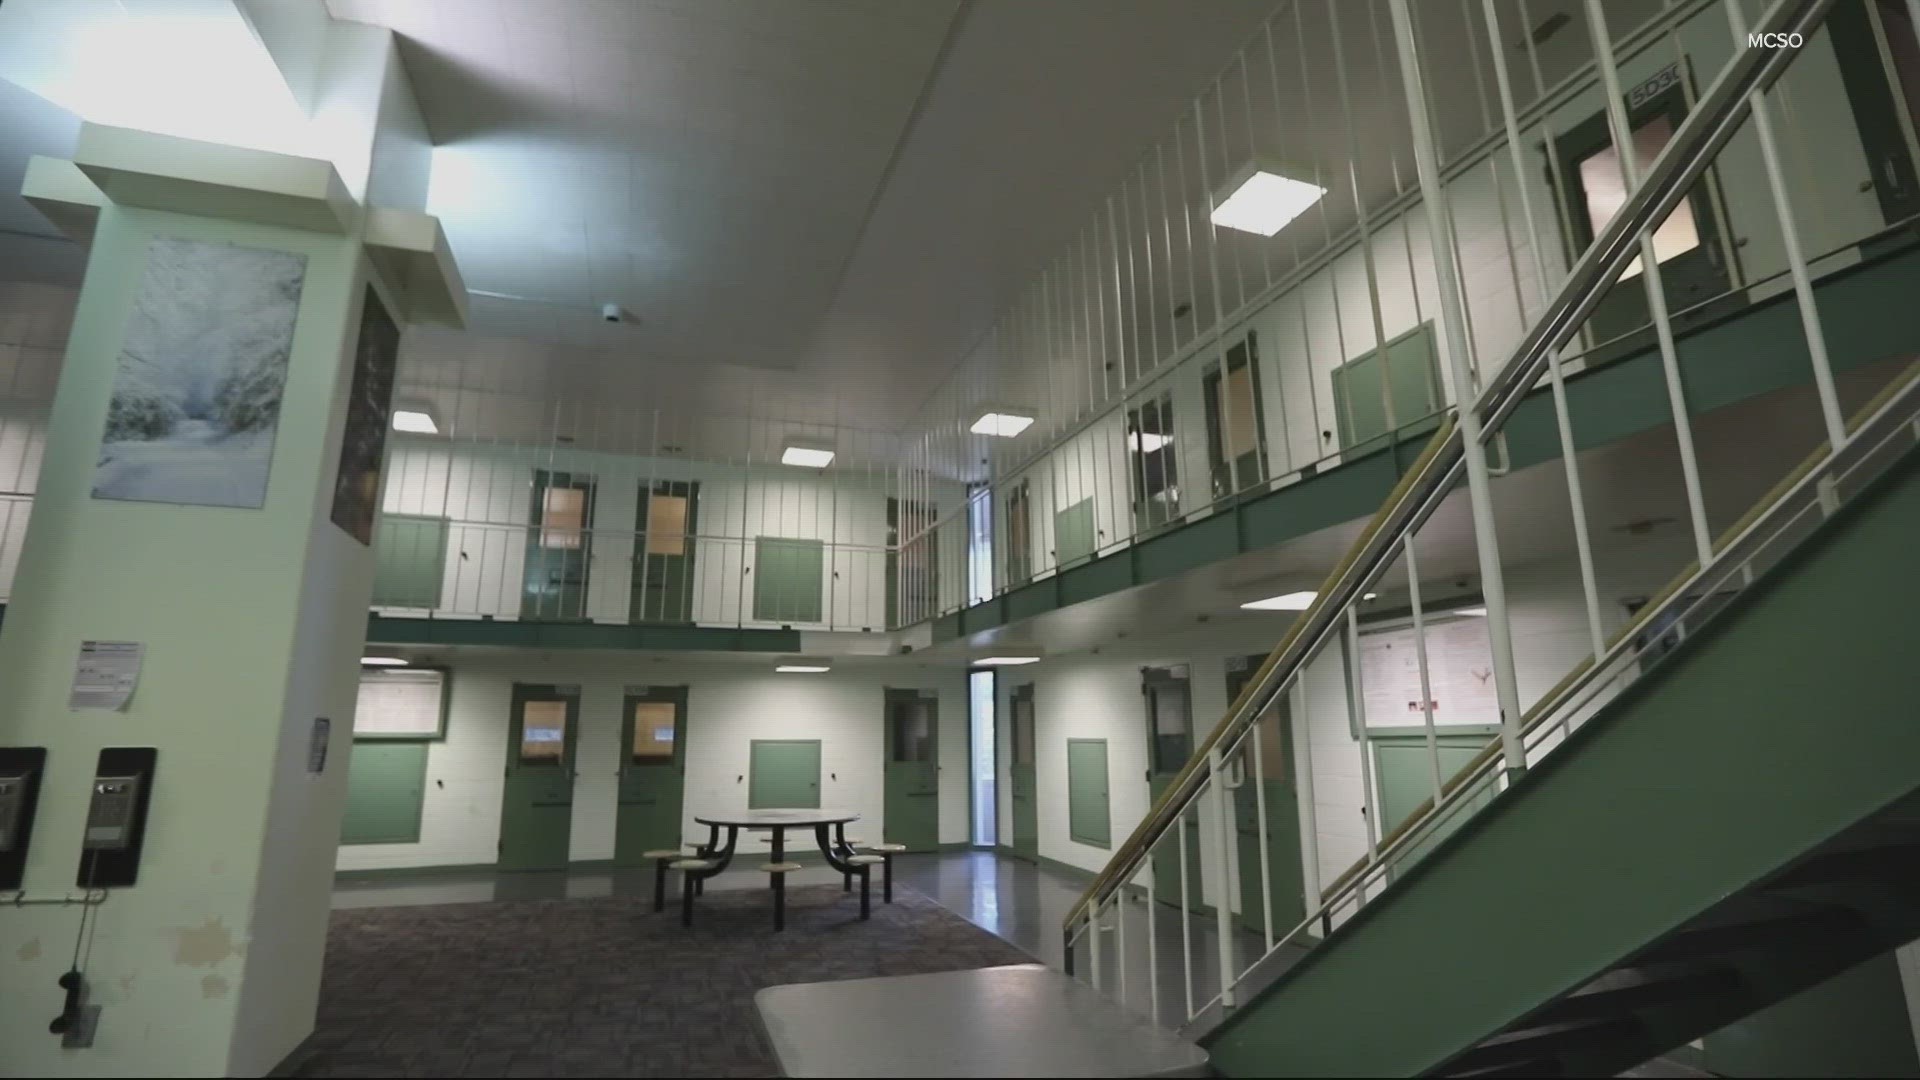 The sheriff's office had warned that a $3.4 million budget shortfall could force it to close more than 200 beds, losing nearly a fifth of the jail's capacity.